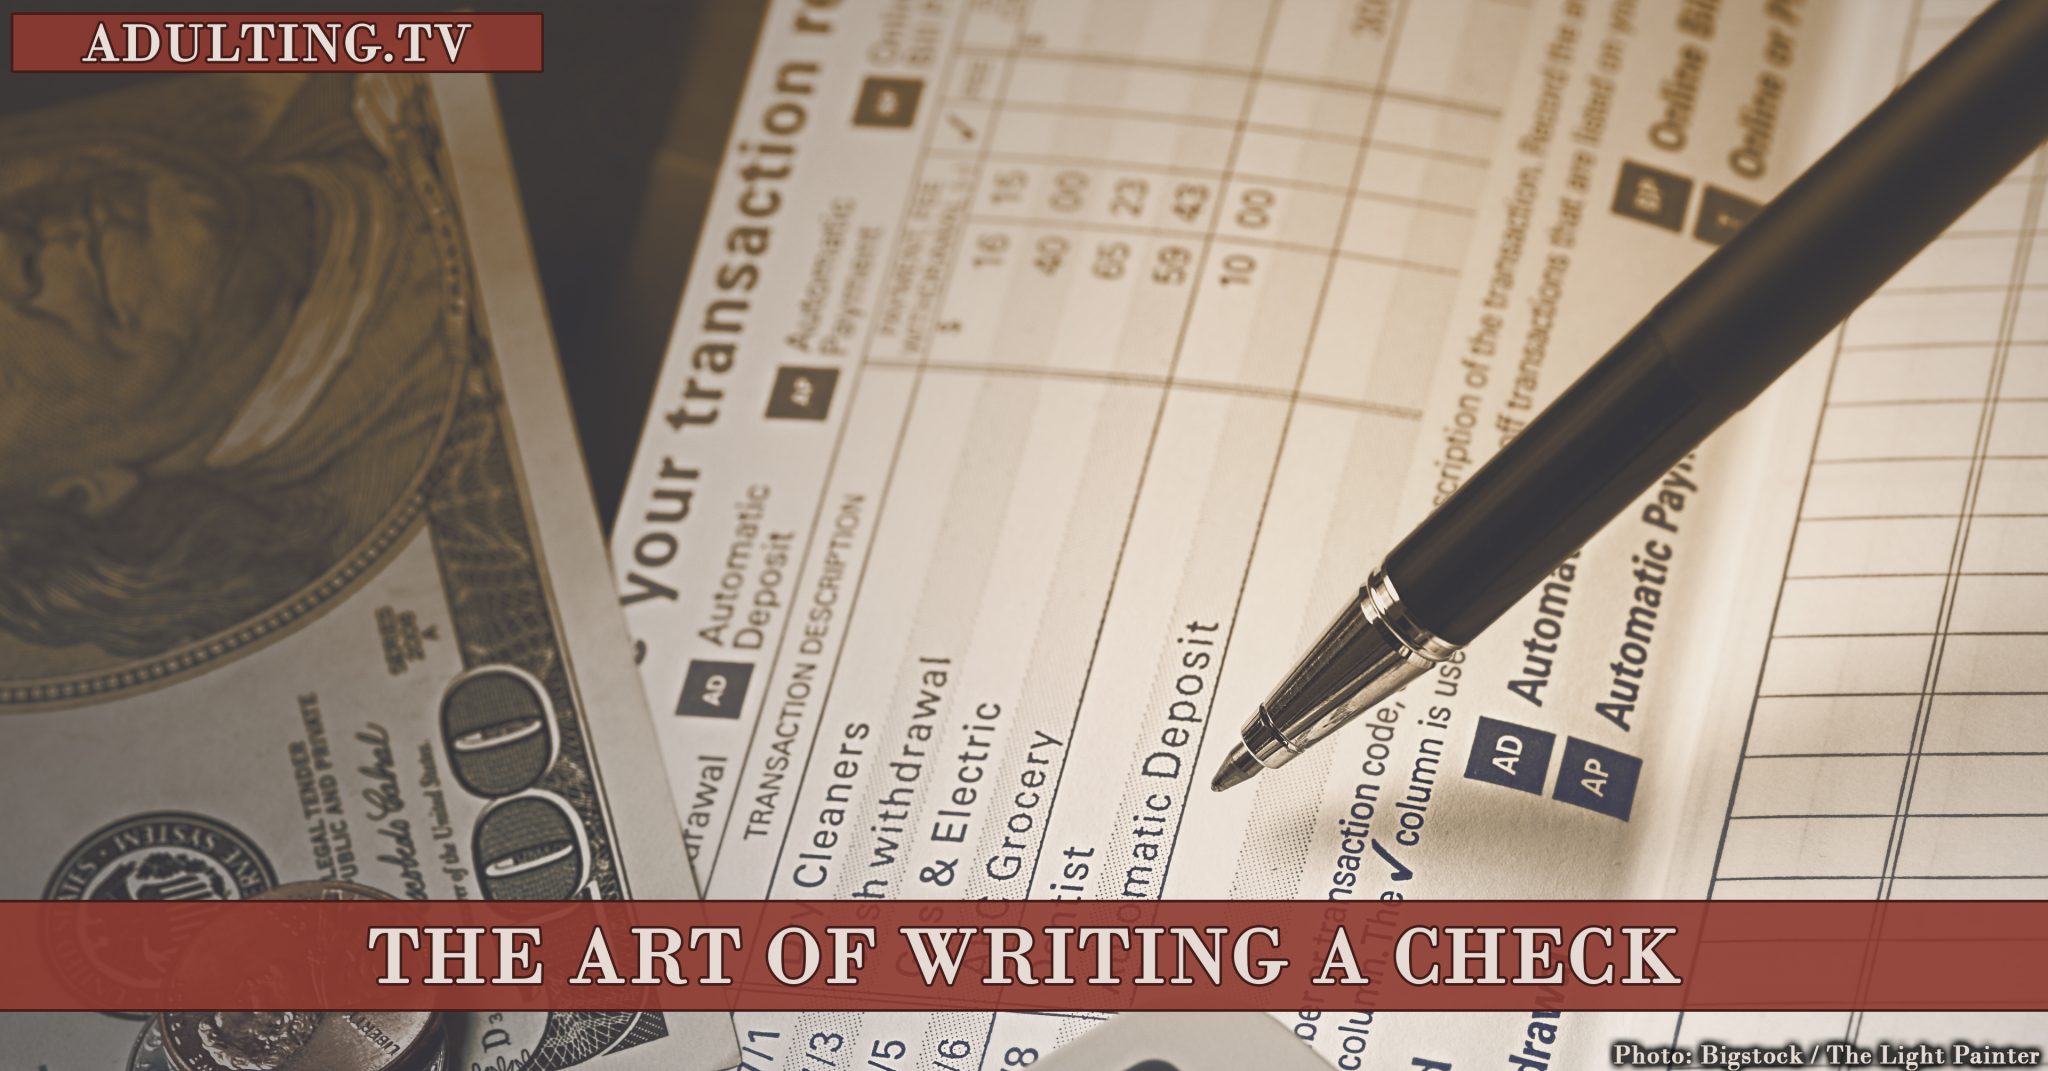 The Art of Writing a Check - Adulting